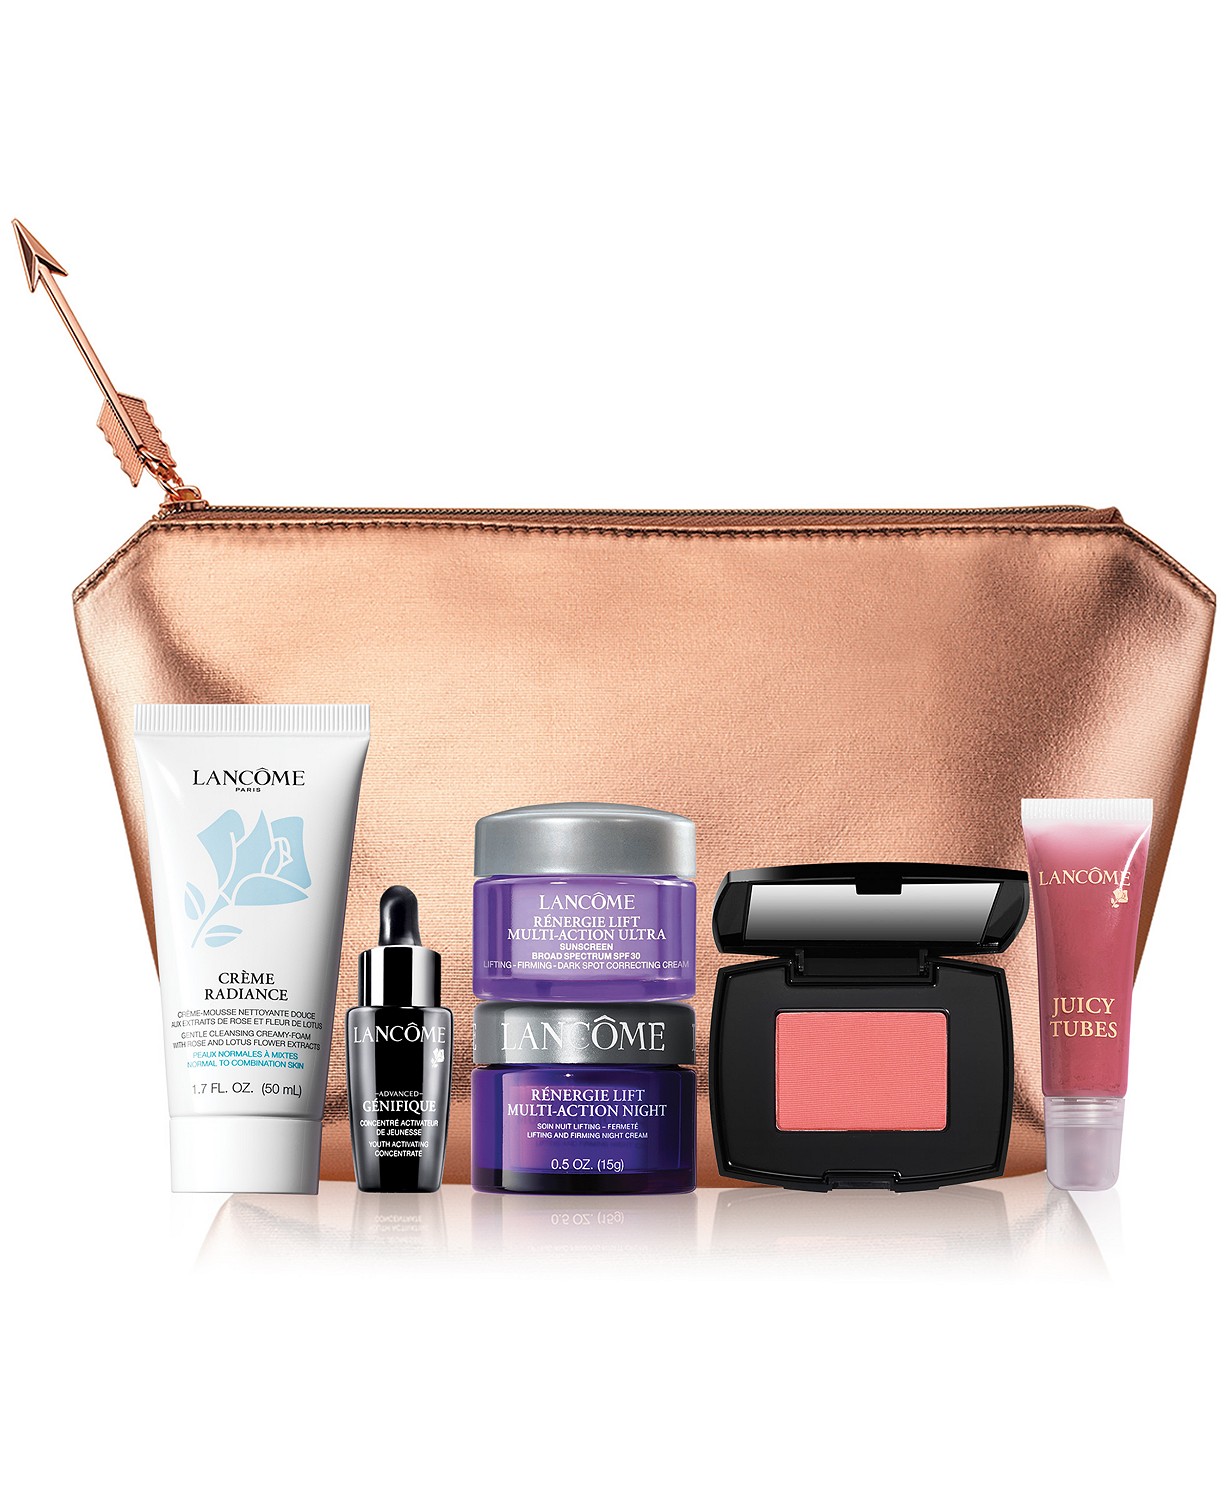 FREE 7-pc gift with any $39.50 Lancôme Purchase.